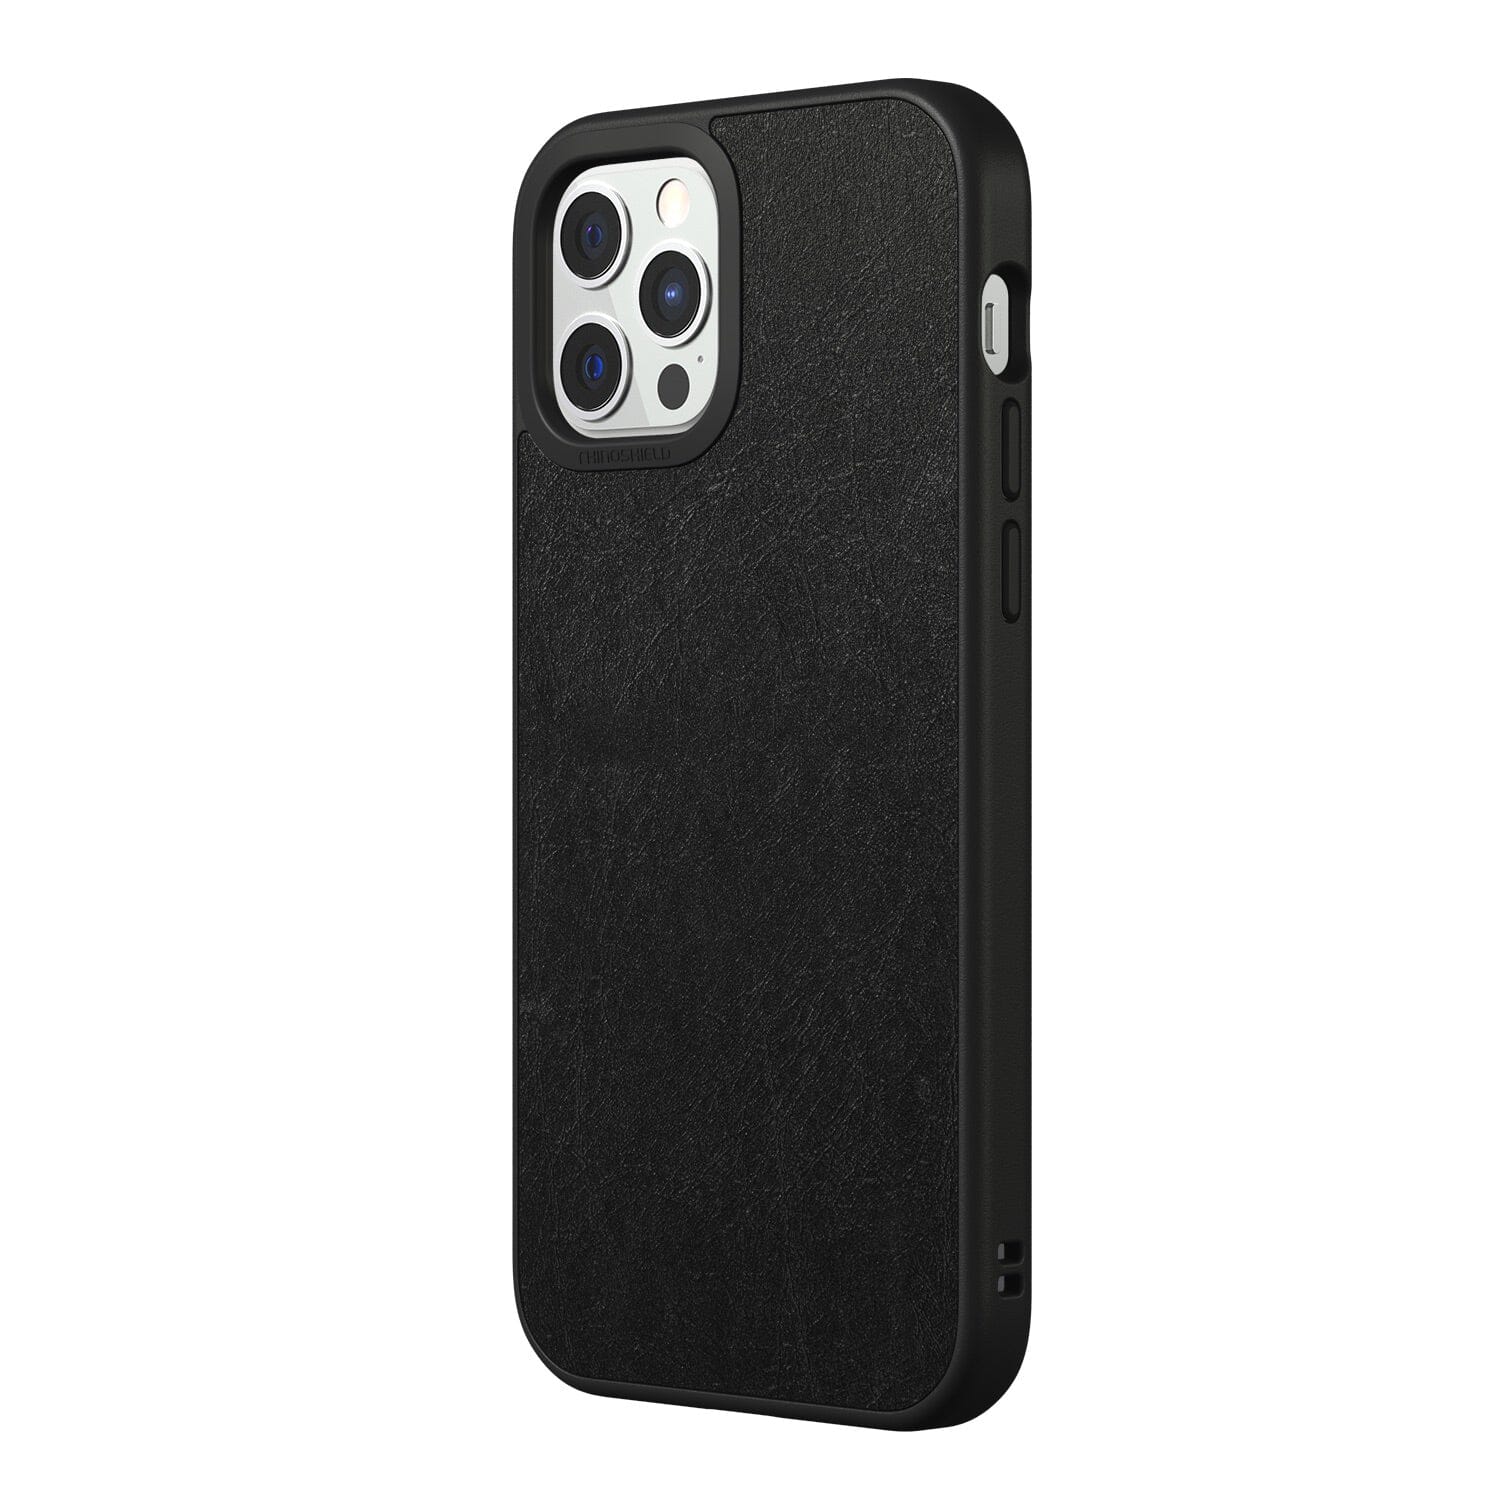 RhinoShield SolidSuit Protective Case with Premium Finish for iPhone 12 Series (2020) iPhone 12 Series RhinoShield iPhone 12 Pro Max 6.7" Black Leather 